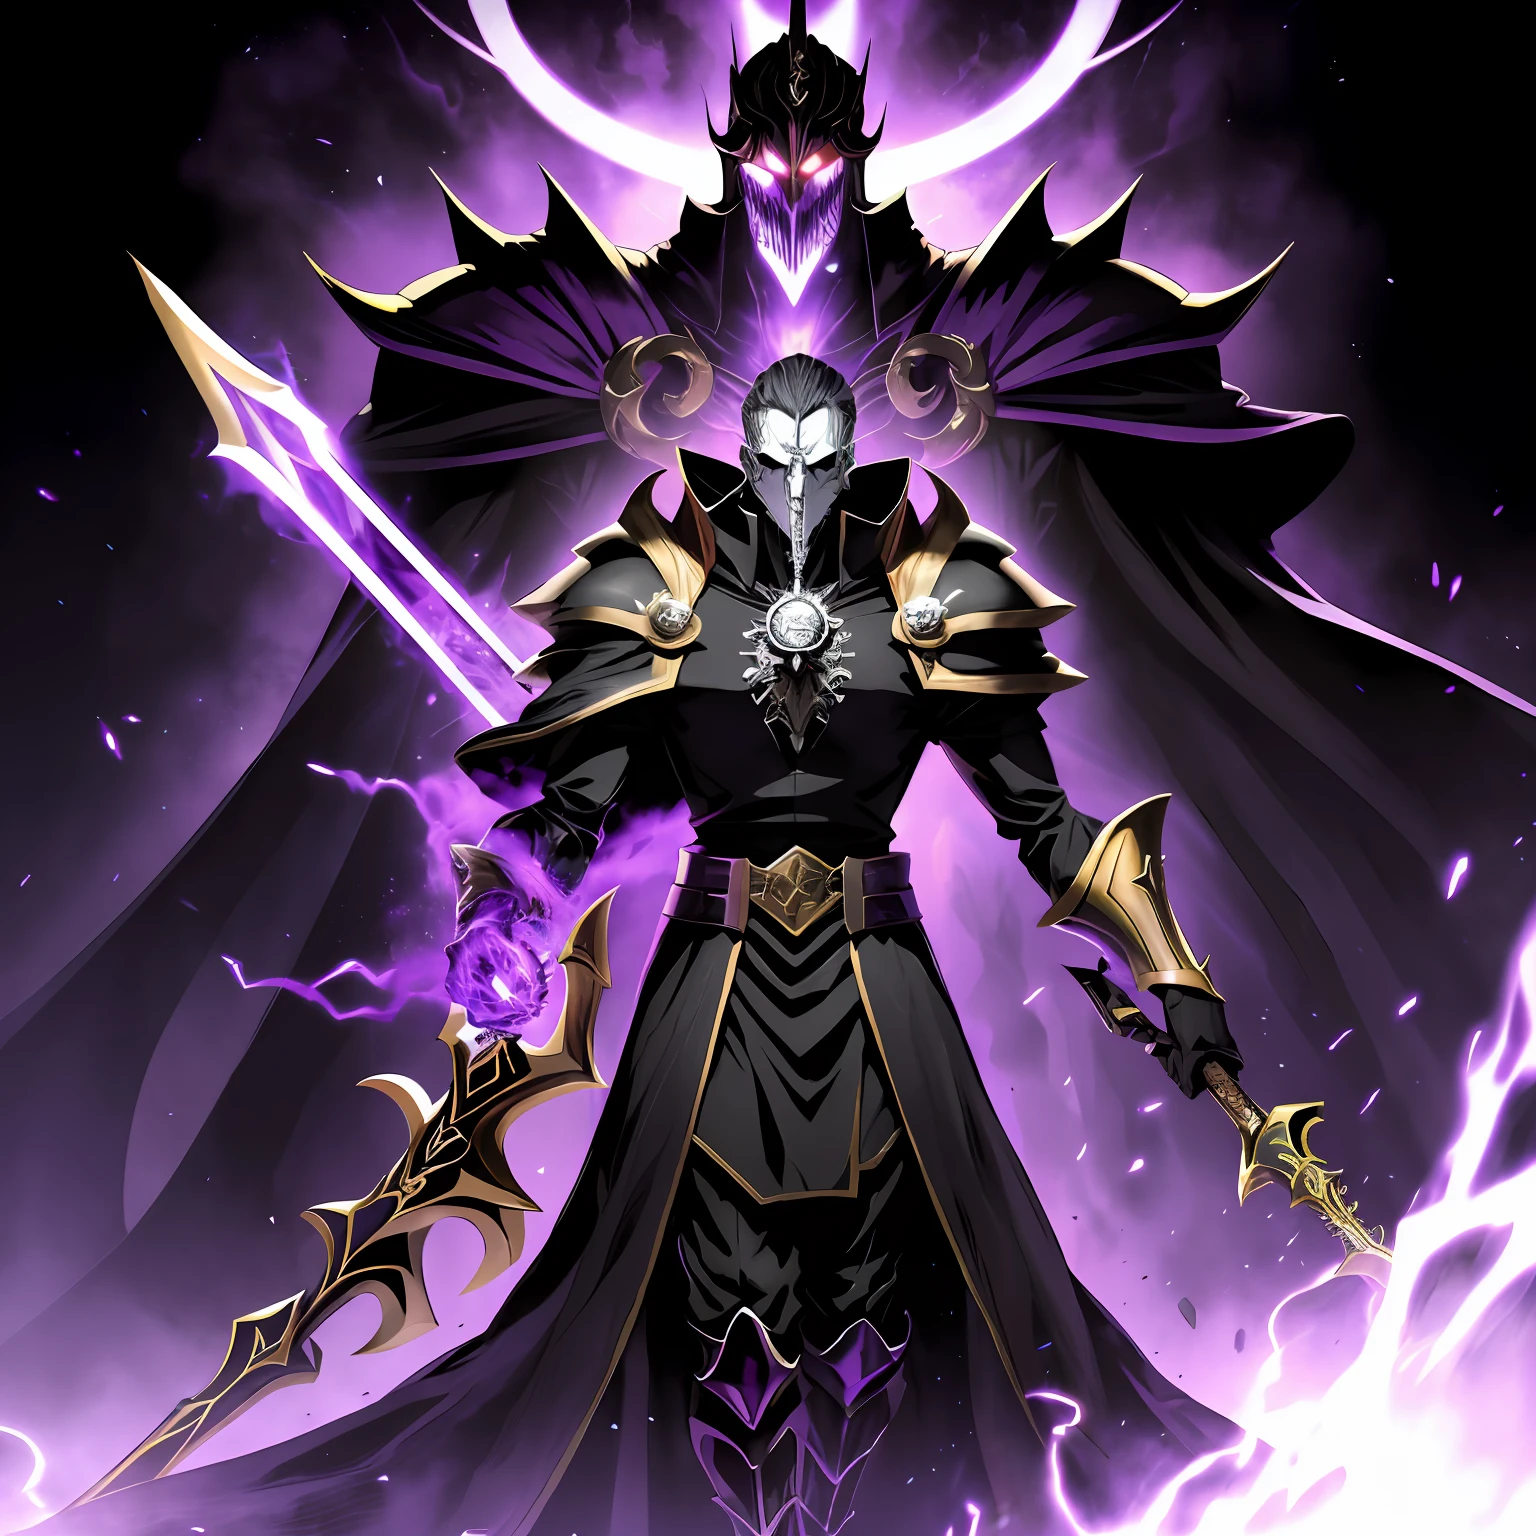 a close up of a toguro100 person with a sword and a purple cloak, ainz ooal gown, overlord!!!, overlord, de overlord, beautiful male god of death, overlord Temporada 4, king of time reaper, offcial art, portrait of the god of death, the king of death, Ish, Albedo do anime overlord, death god,((((Side view)))),(full body of a toguro100 person with a sword and a purple cloak, Ainz Ooal Dress, overlord!!!, overlord, por overlord, beautiful male god of death, overlord Temporada 4, king of time reaper, offcial art, portrait of the god of death, the king of death, Ish, Albedo do anime overlord, death god) , dynamic dark fantasy dinner table, Character firing black magic from his hand, vortex, particuls, in action, (((View of the entire dinner)))